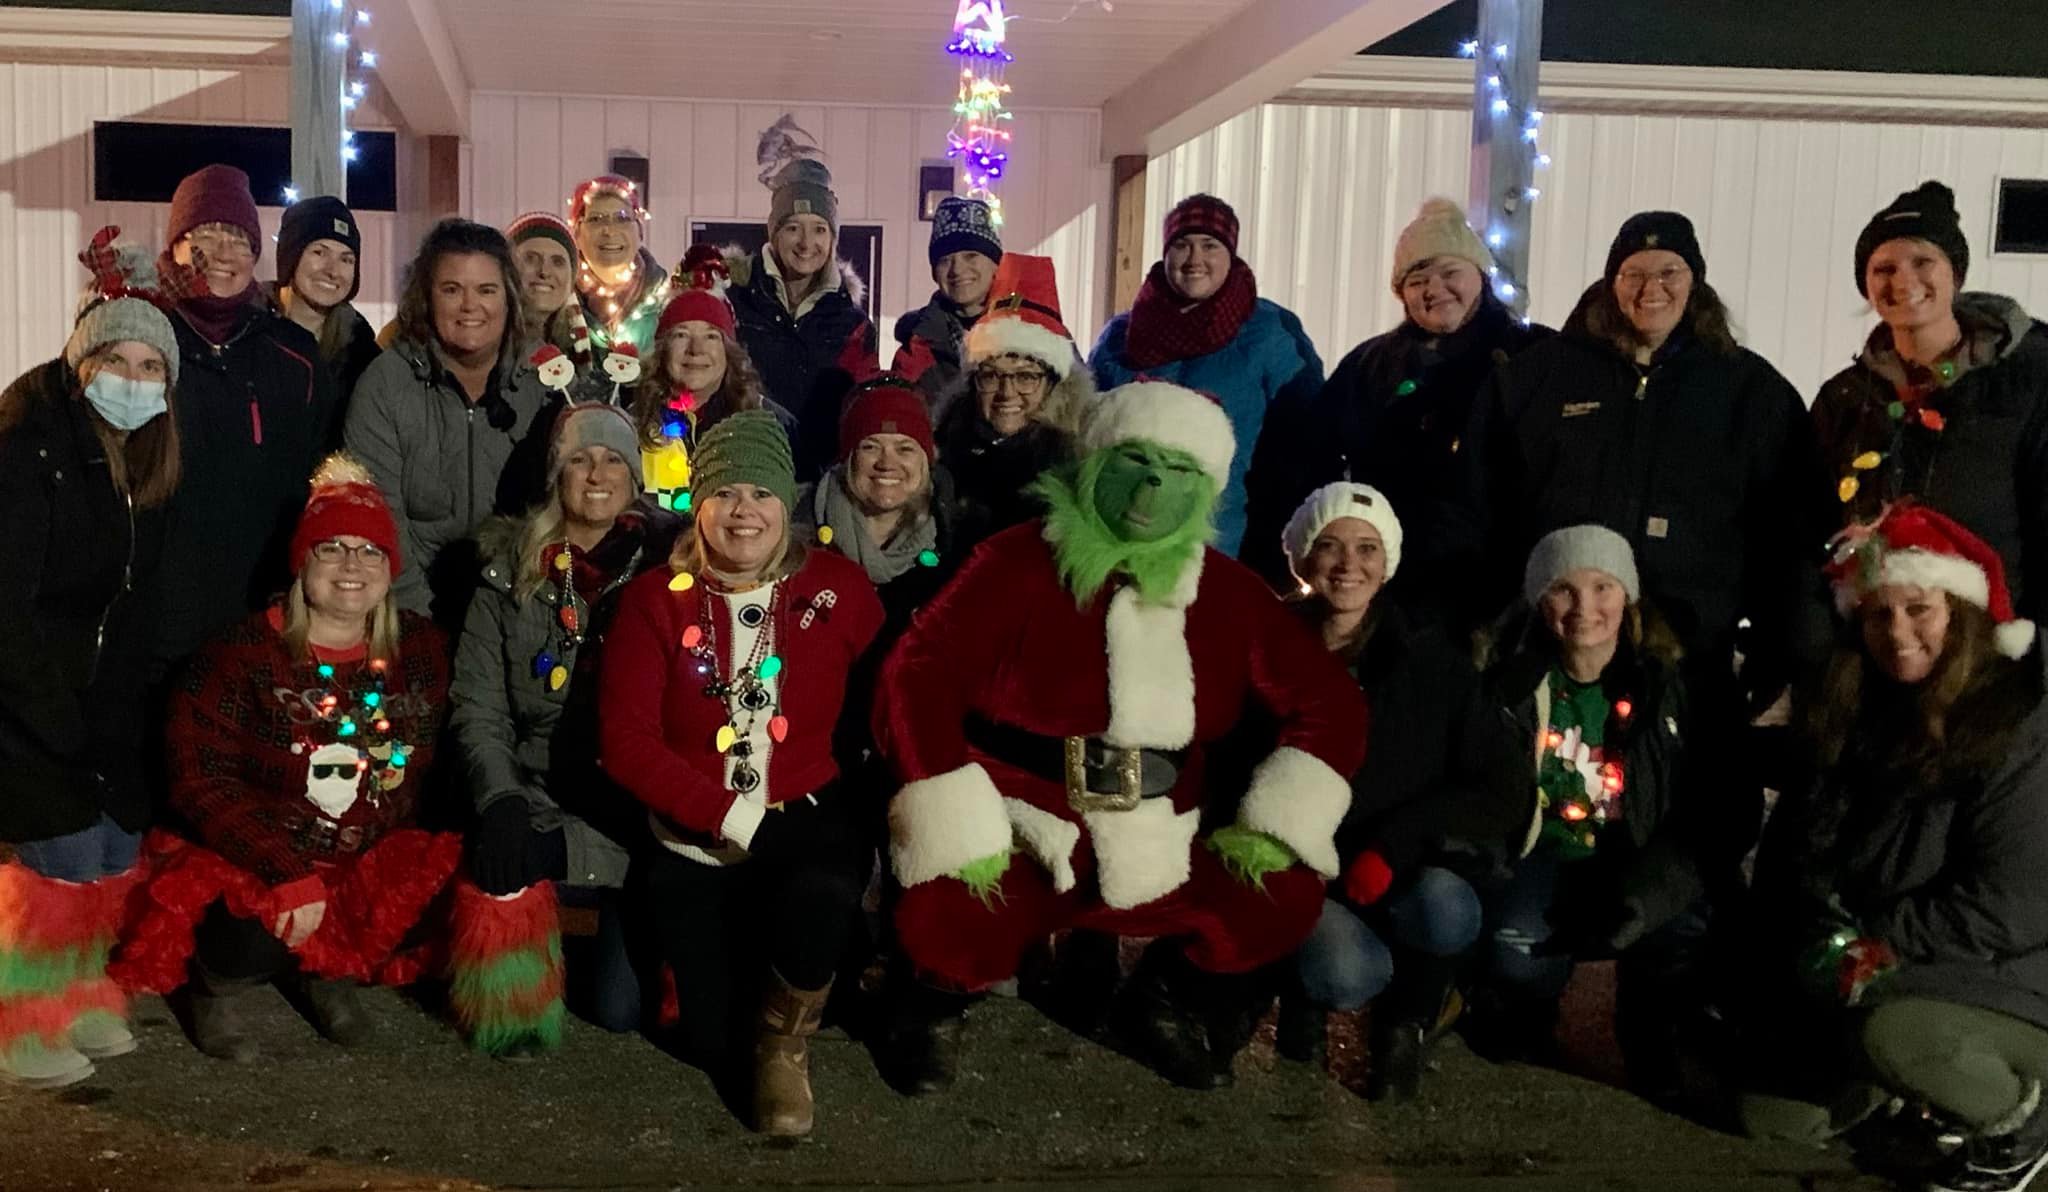 Staff with Santa and Grinch at Winterfest 2021